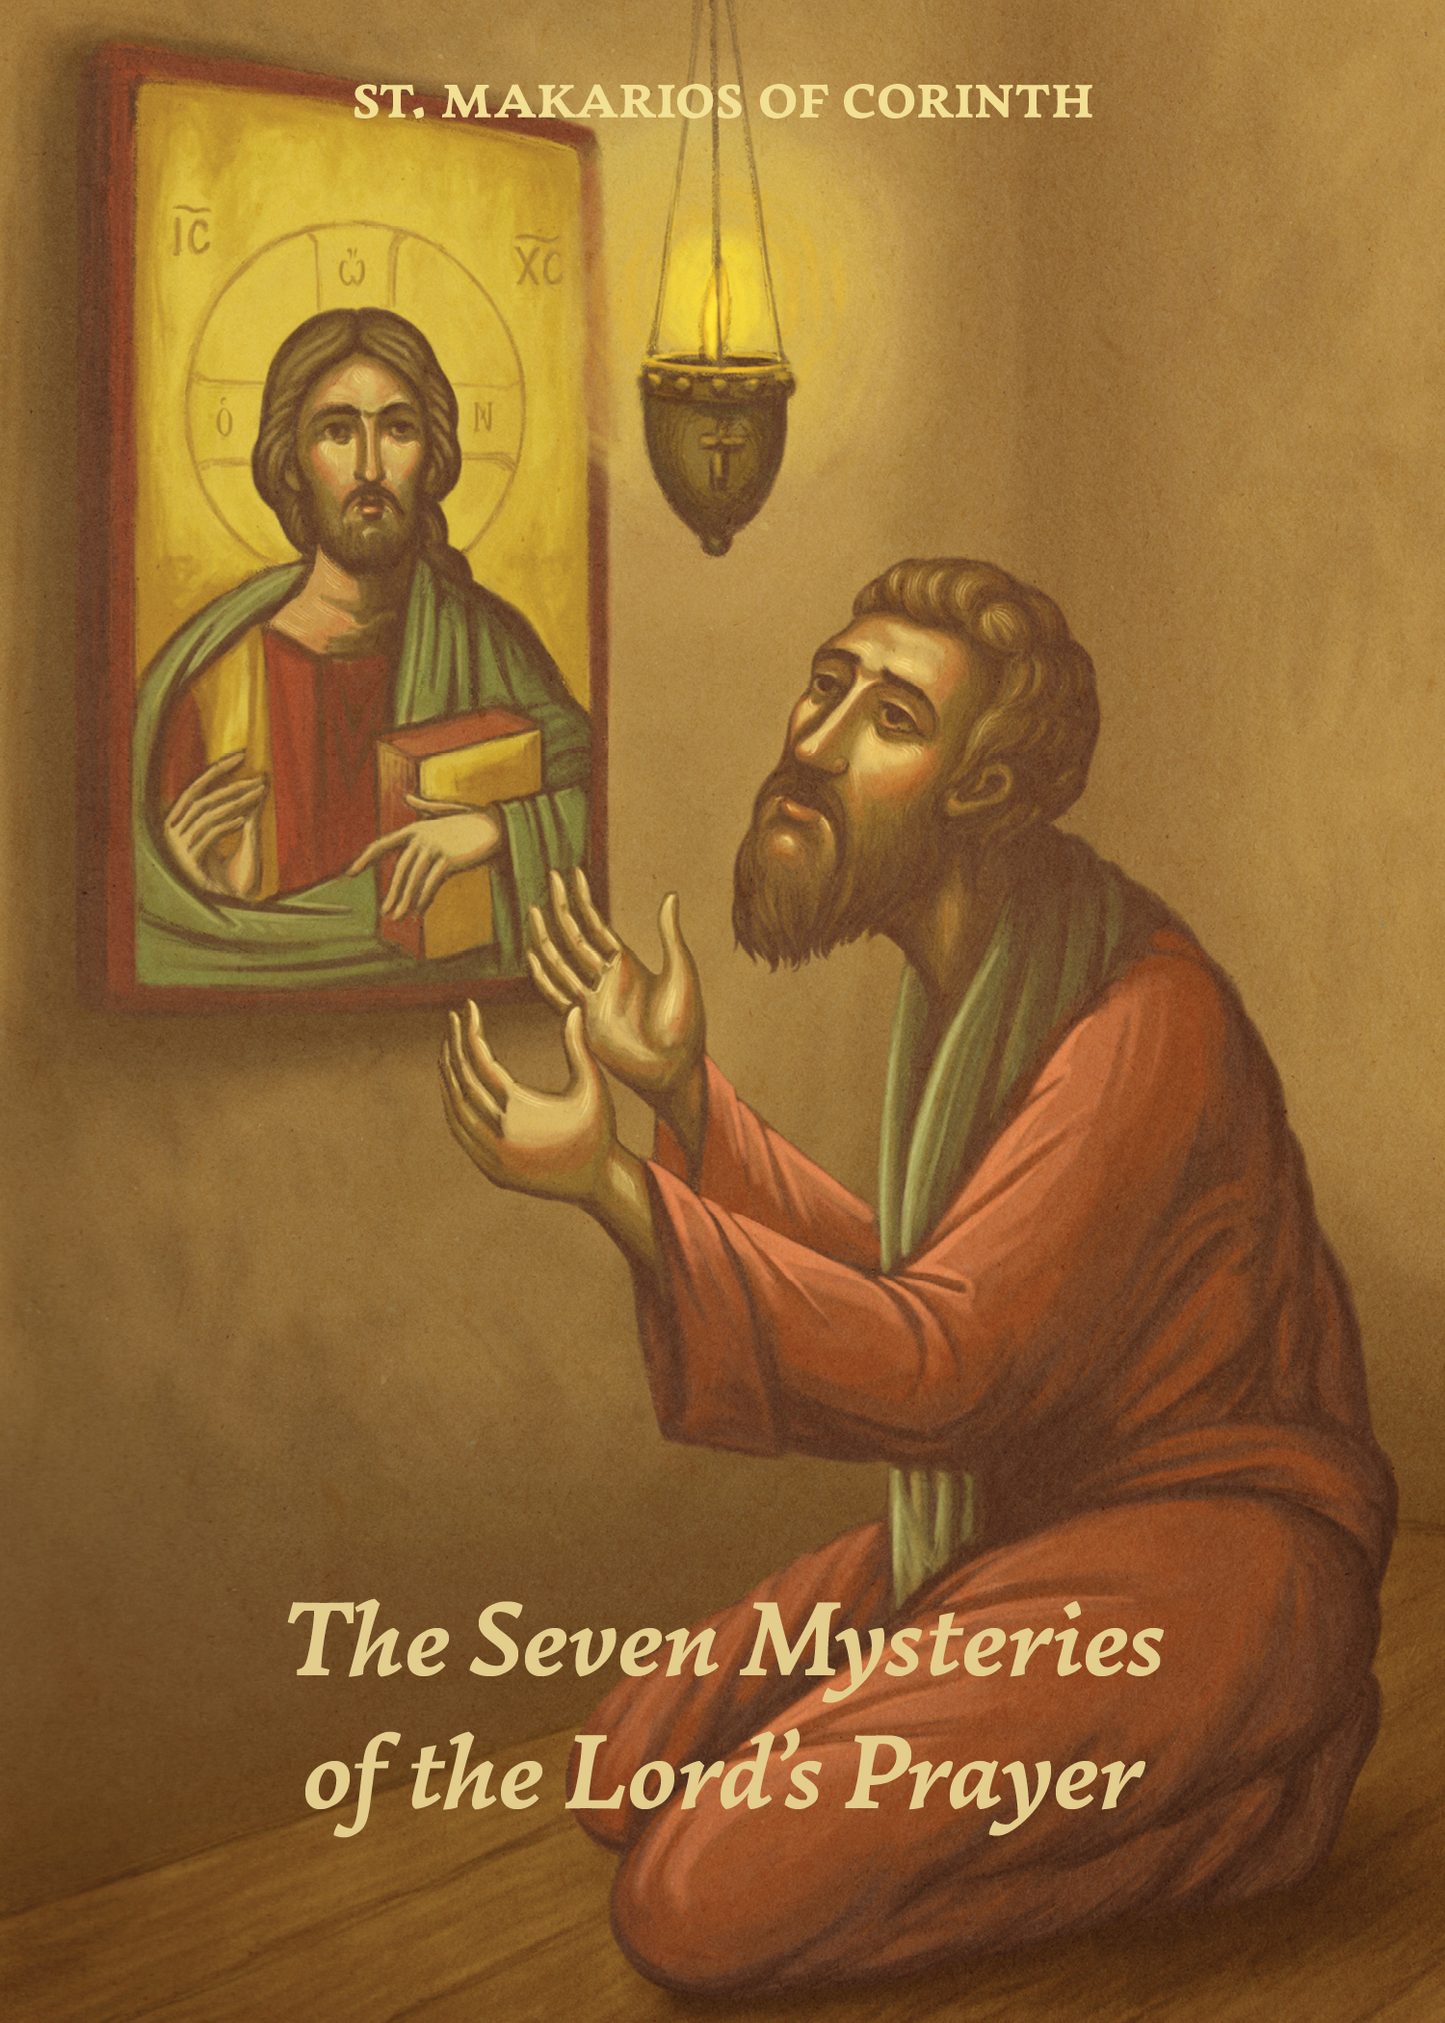 The Seven Mysteries of the Lord's Prayer